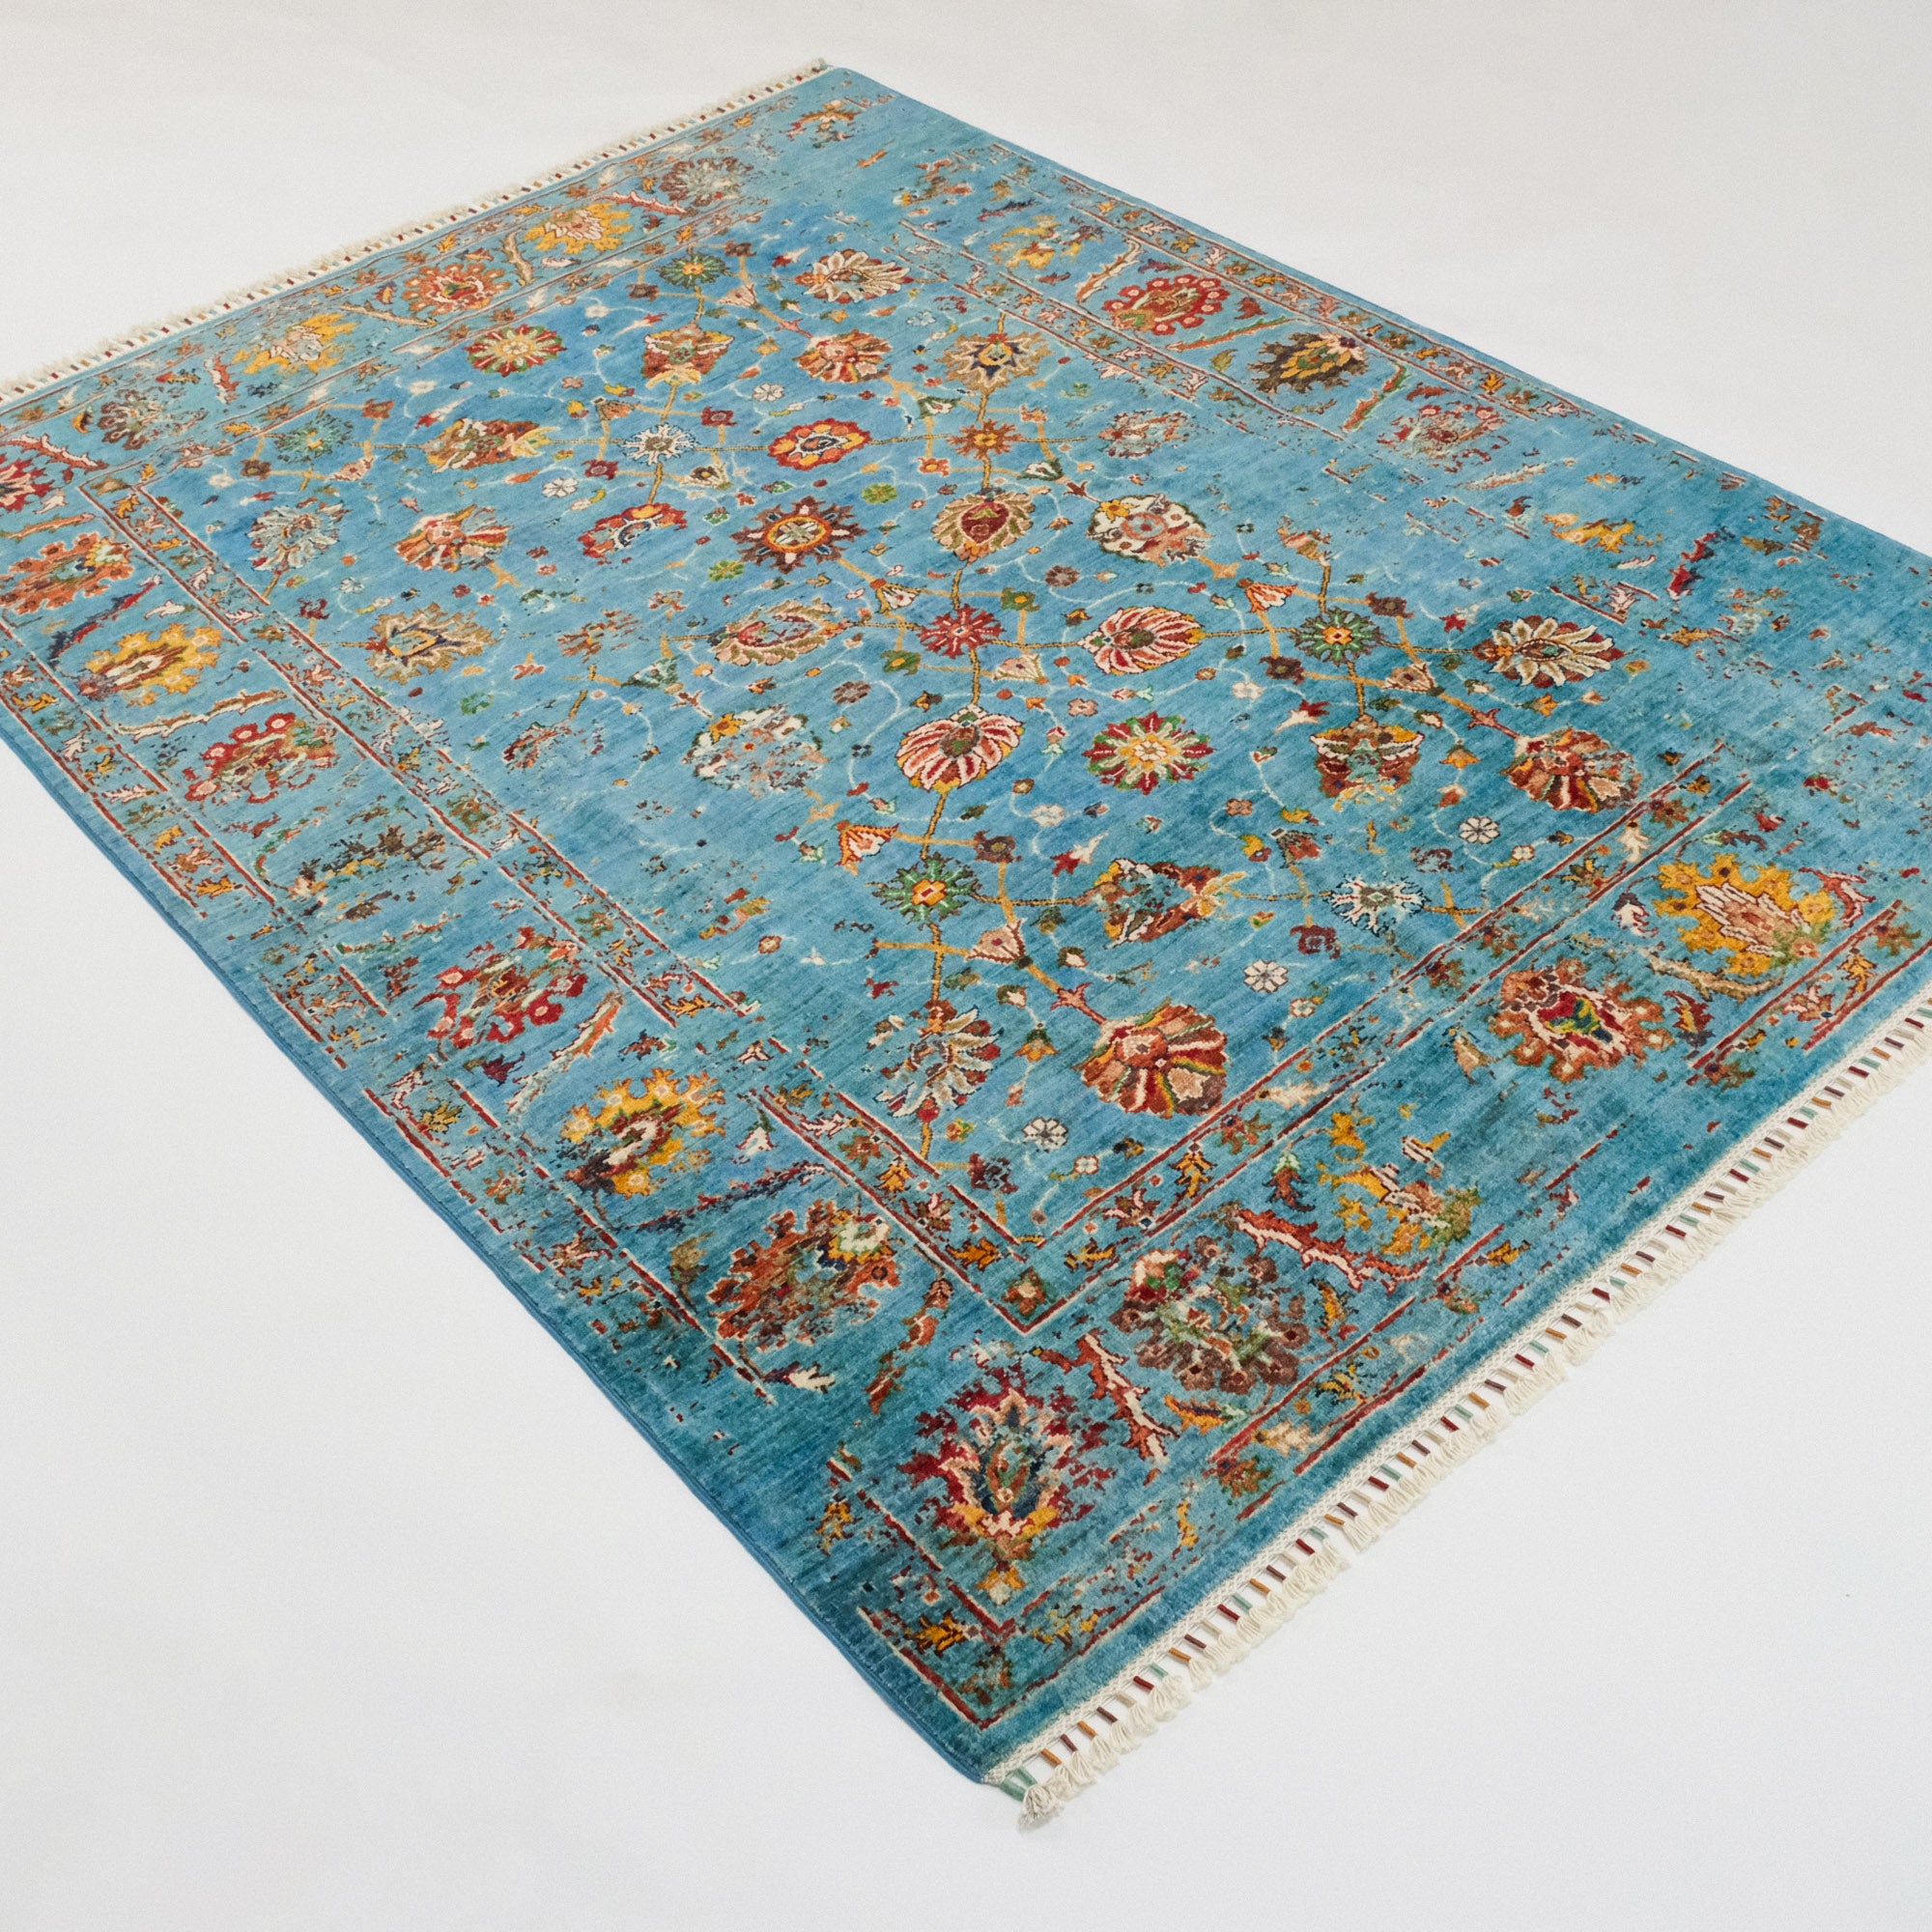 Mihman Series Hand-Woven Uşak Patterned Colorful Wool Carpet